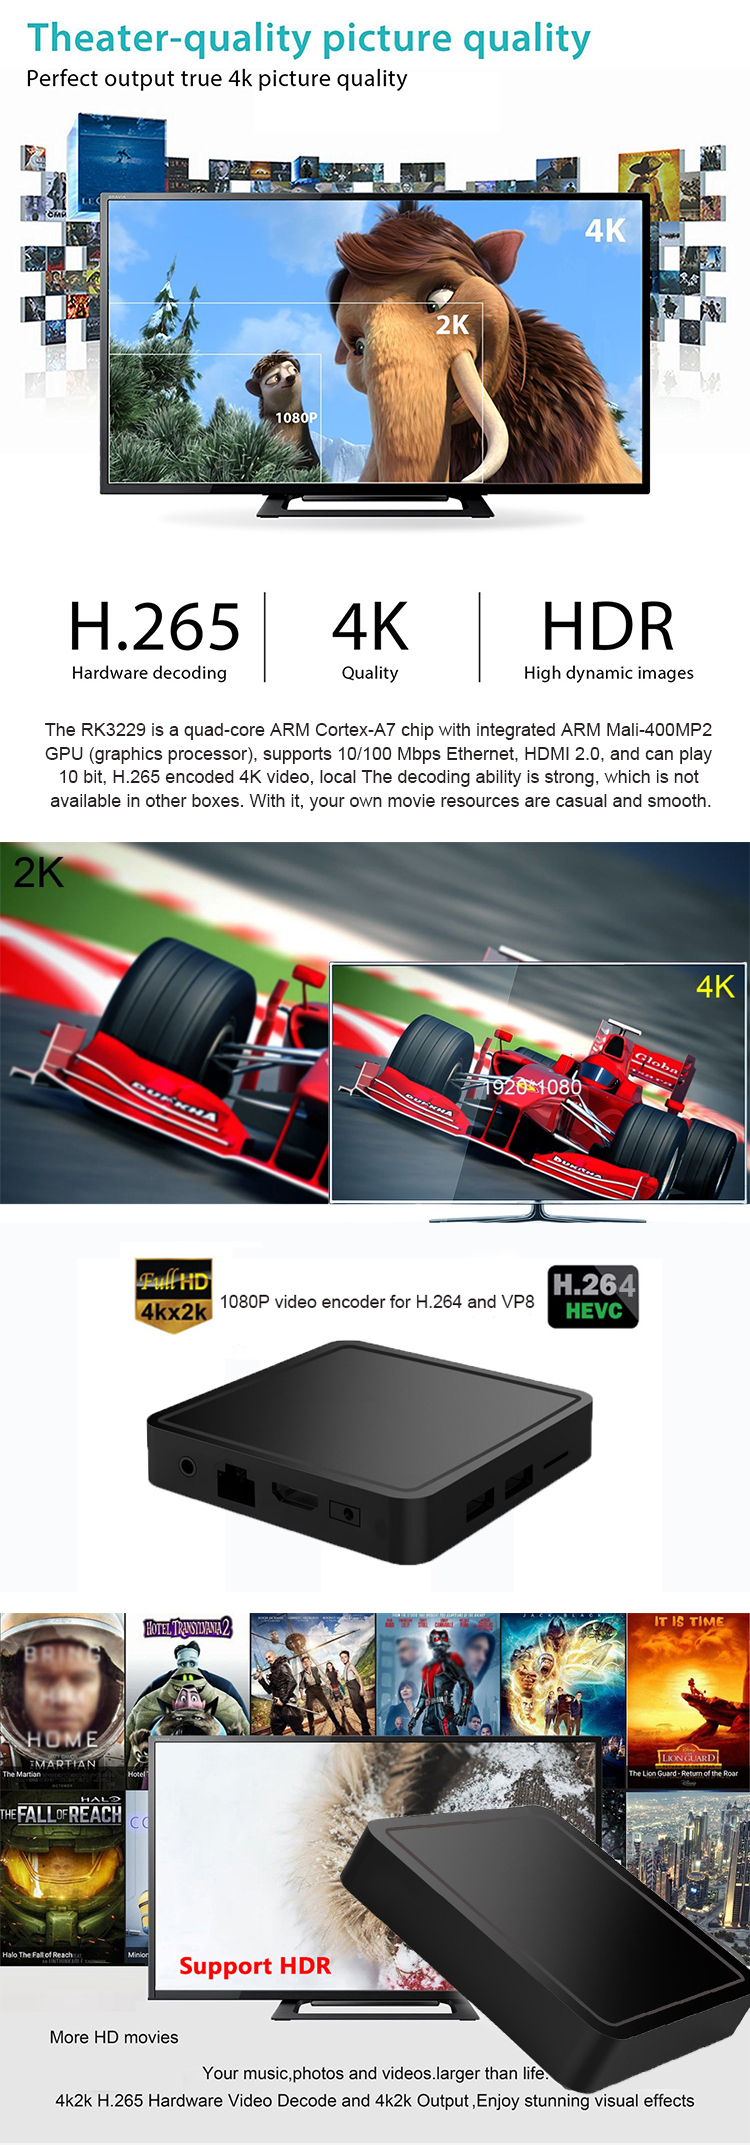 Wholesale Cheapest M8 Rk3229 2G Ram 16G Rom Smart Tv Android 7.1 Best android Tv Box 2019